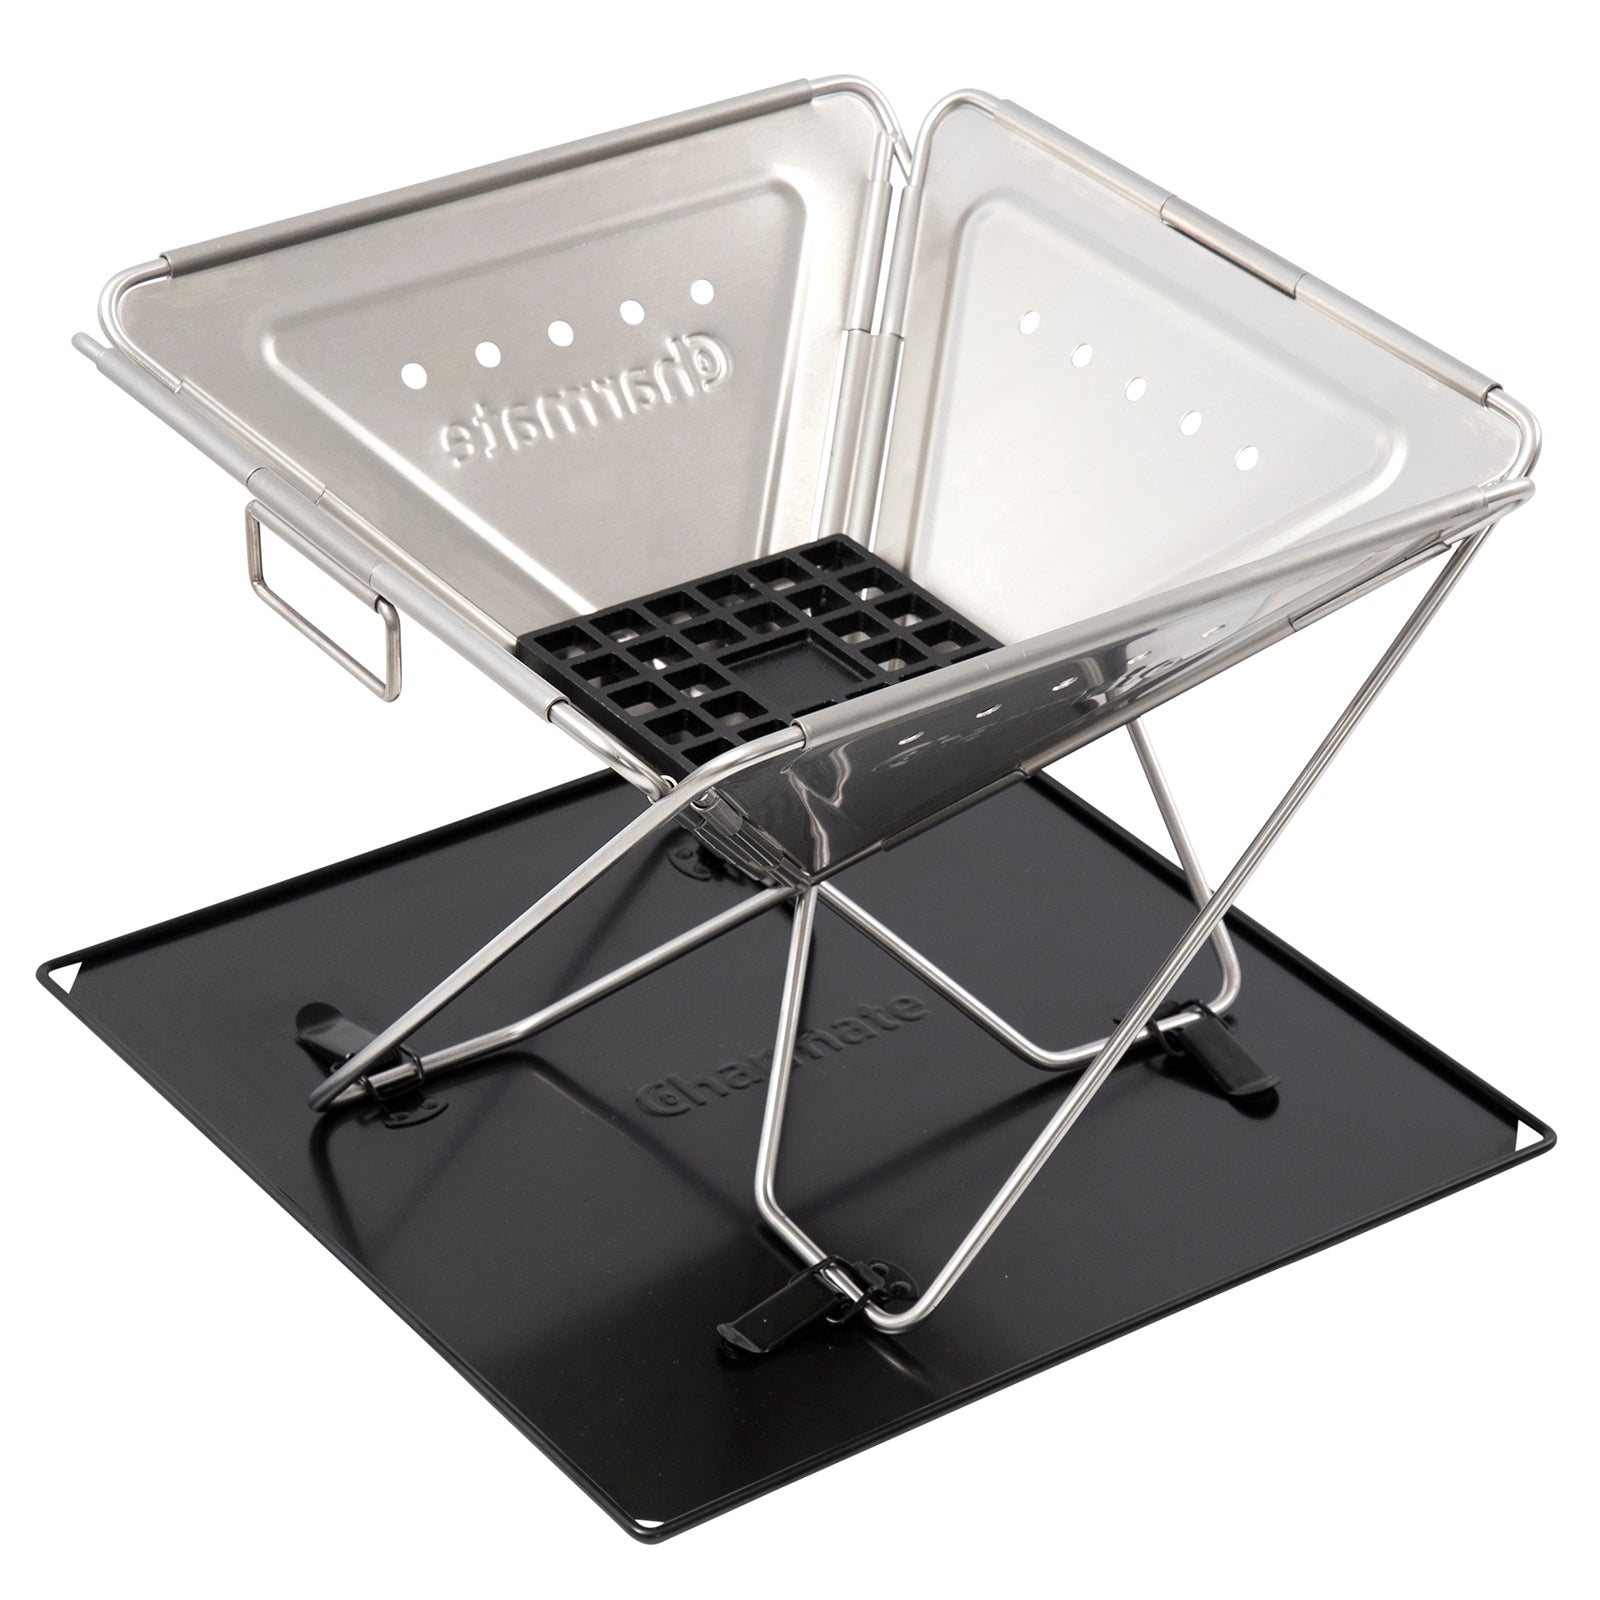 Charmate Collapsible BBQ & Firepit - 450mm